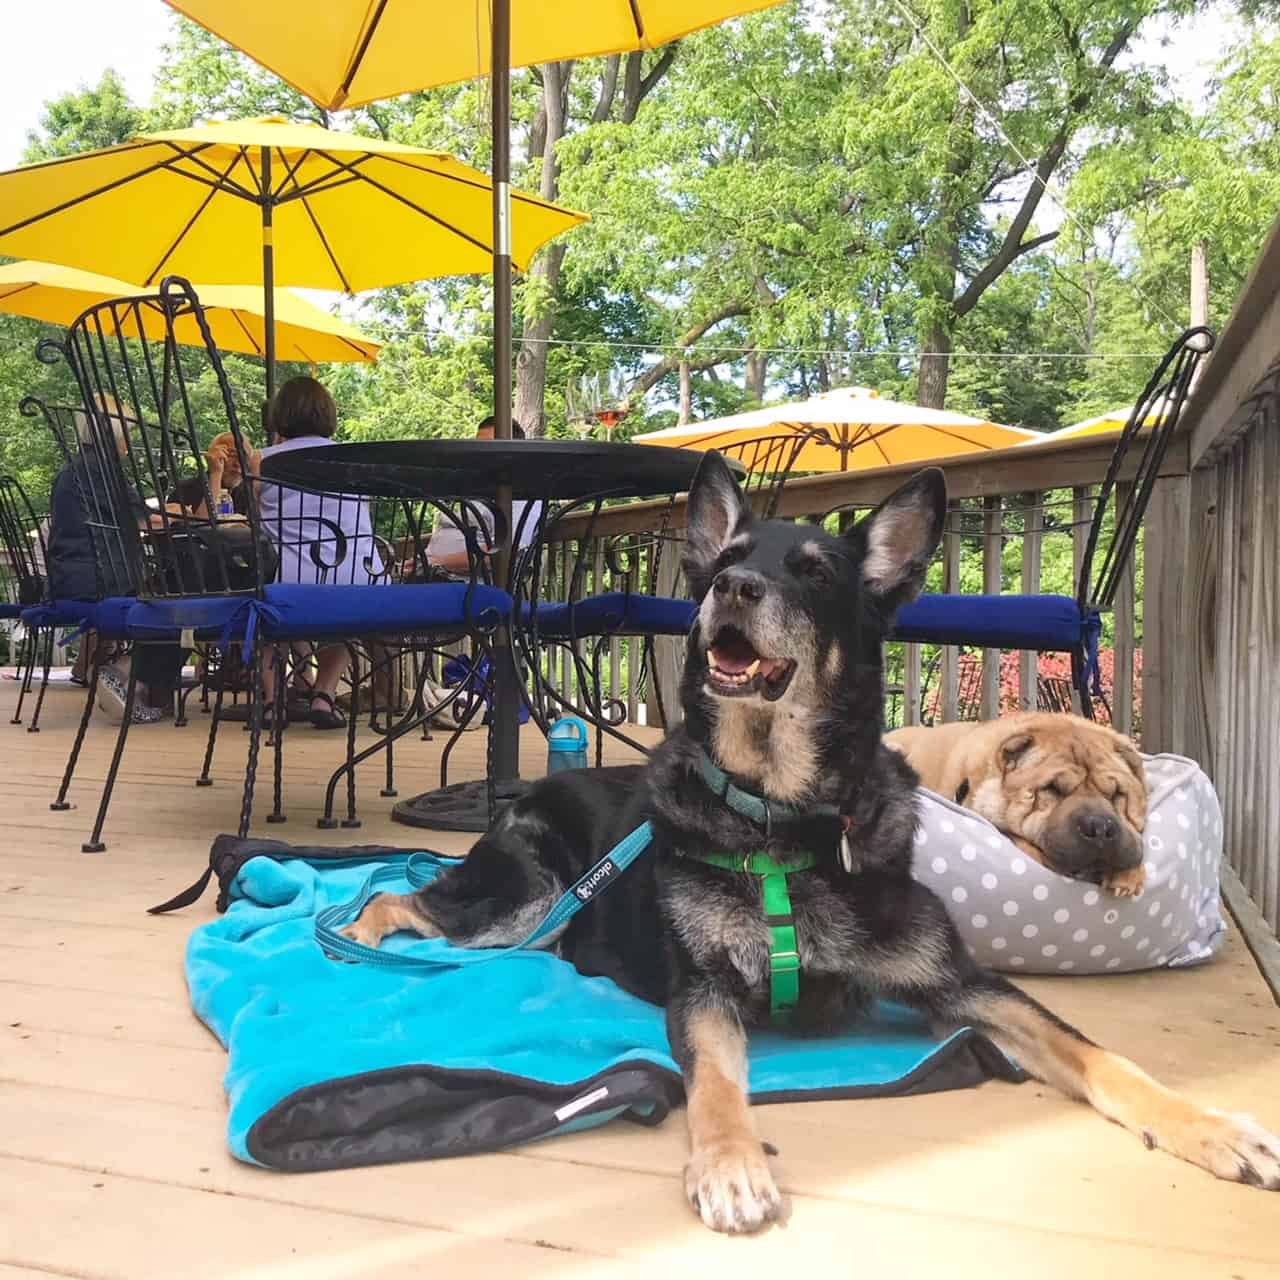 German Shepherd and Shar-Pei on the patio of a pet friendly winery in Finger Lakes, NY